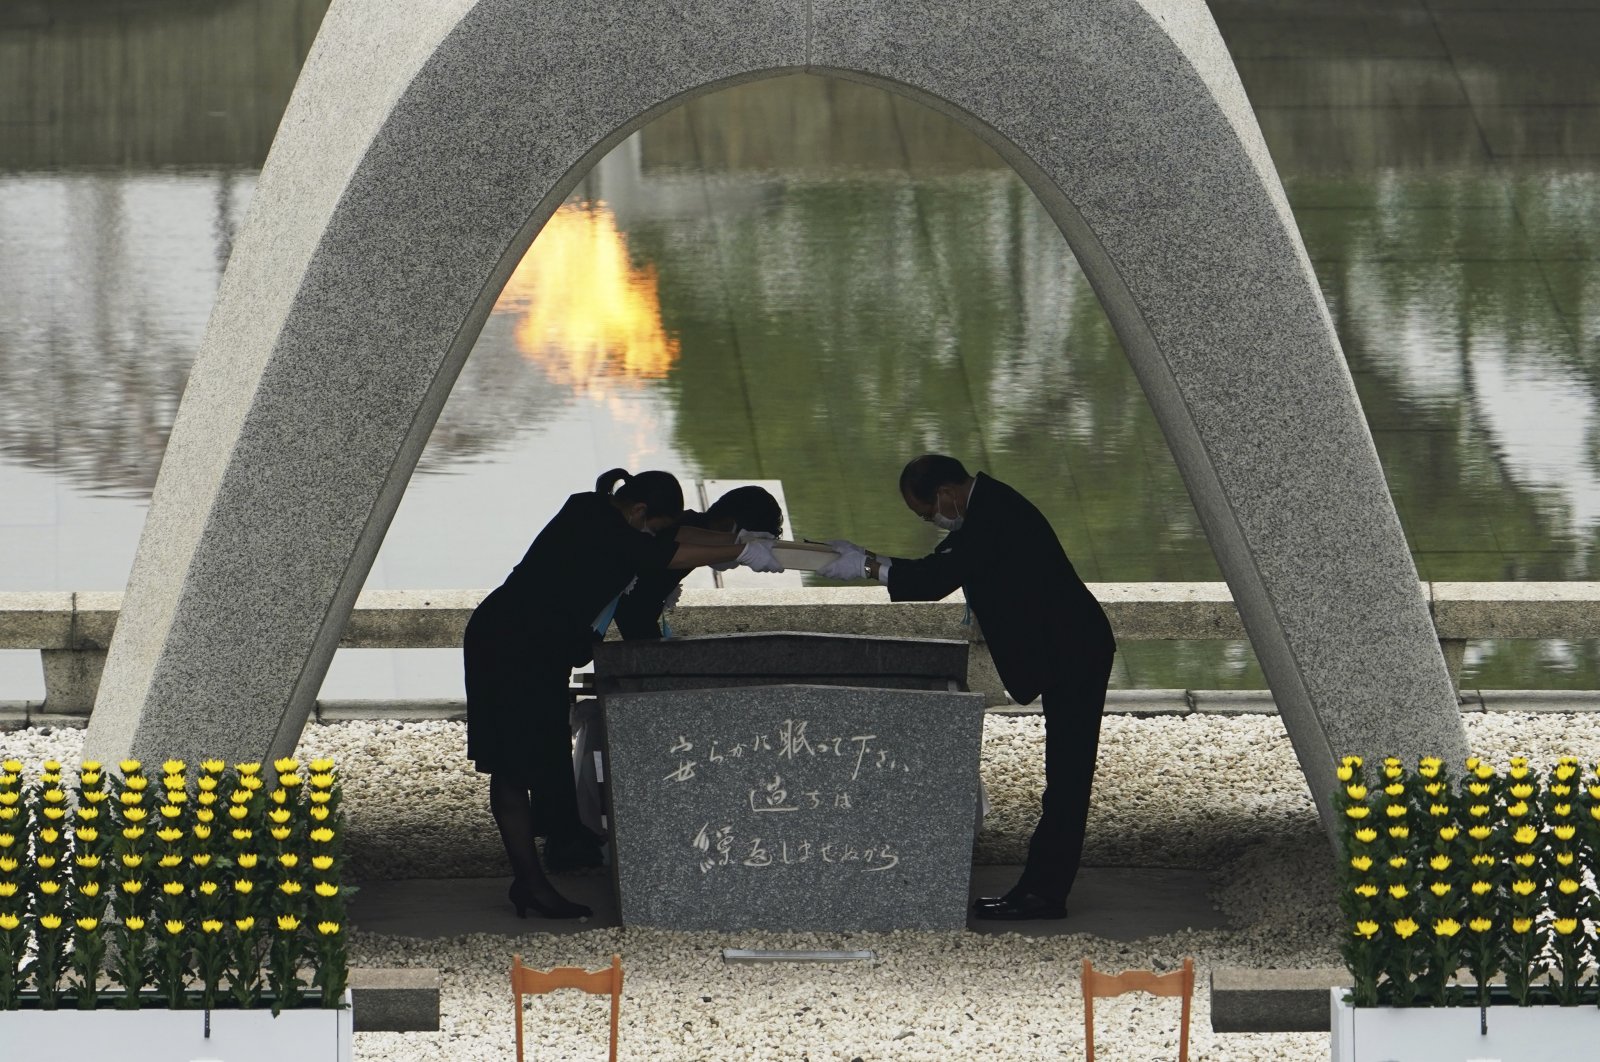 Kazumi Matsui, right, mayor of Hiroshima, and the family of the deceased bow before they place the victims list of the Atomic Bomb at Hiroshima Memorial Cenotaph during the ceremony to mark the 75th anniversary of the bombing at the Hiroshima Peace Memorial Park Thursday, Aug. 6, 2020, in Hiroshima, western Japan. (AP Photo)